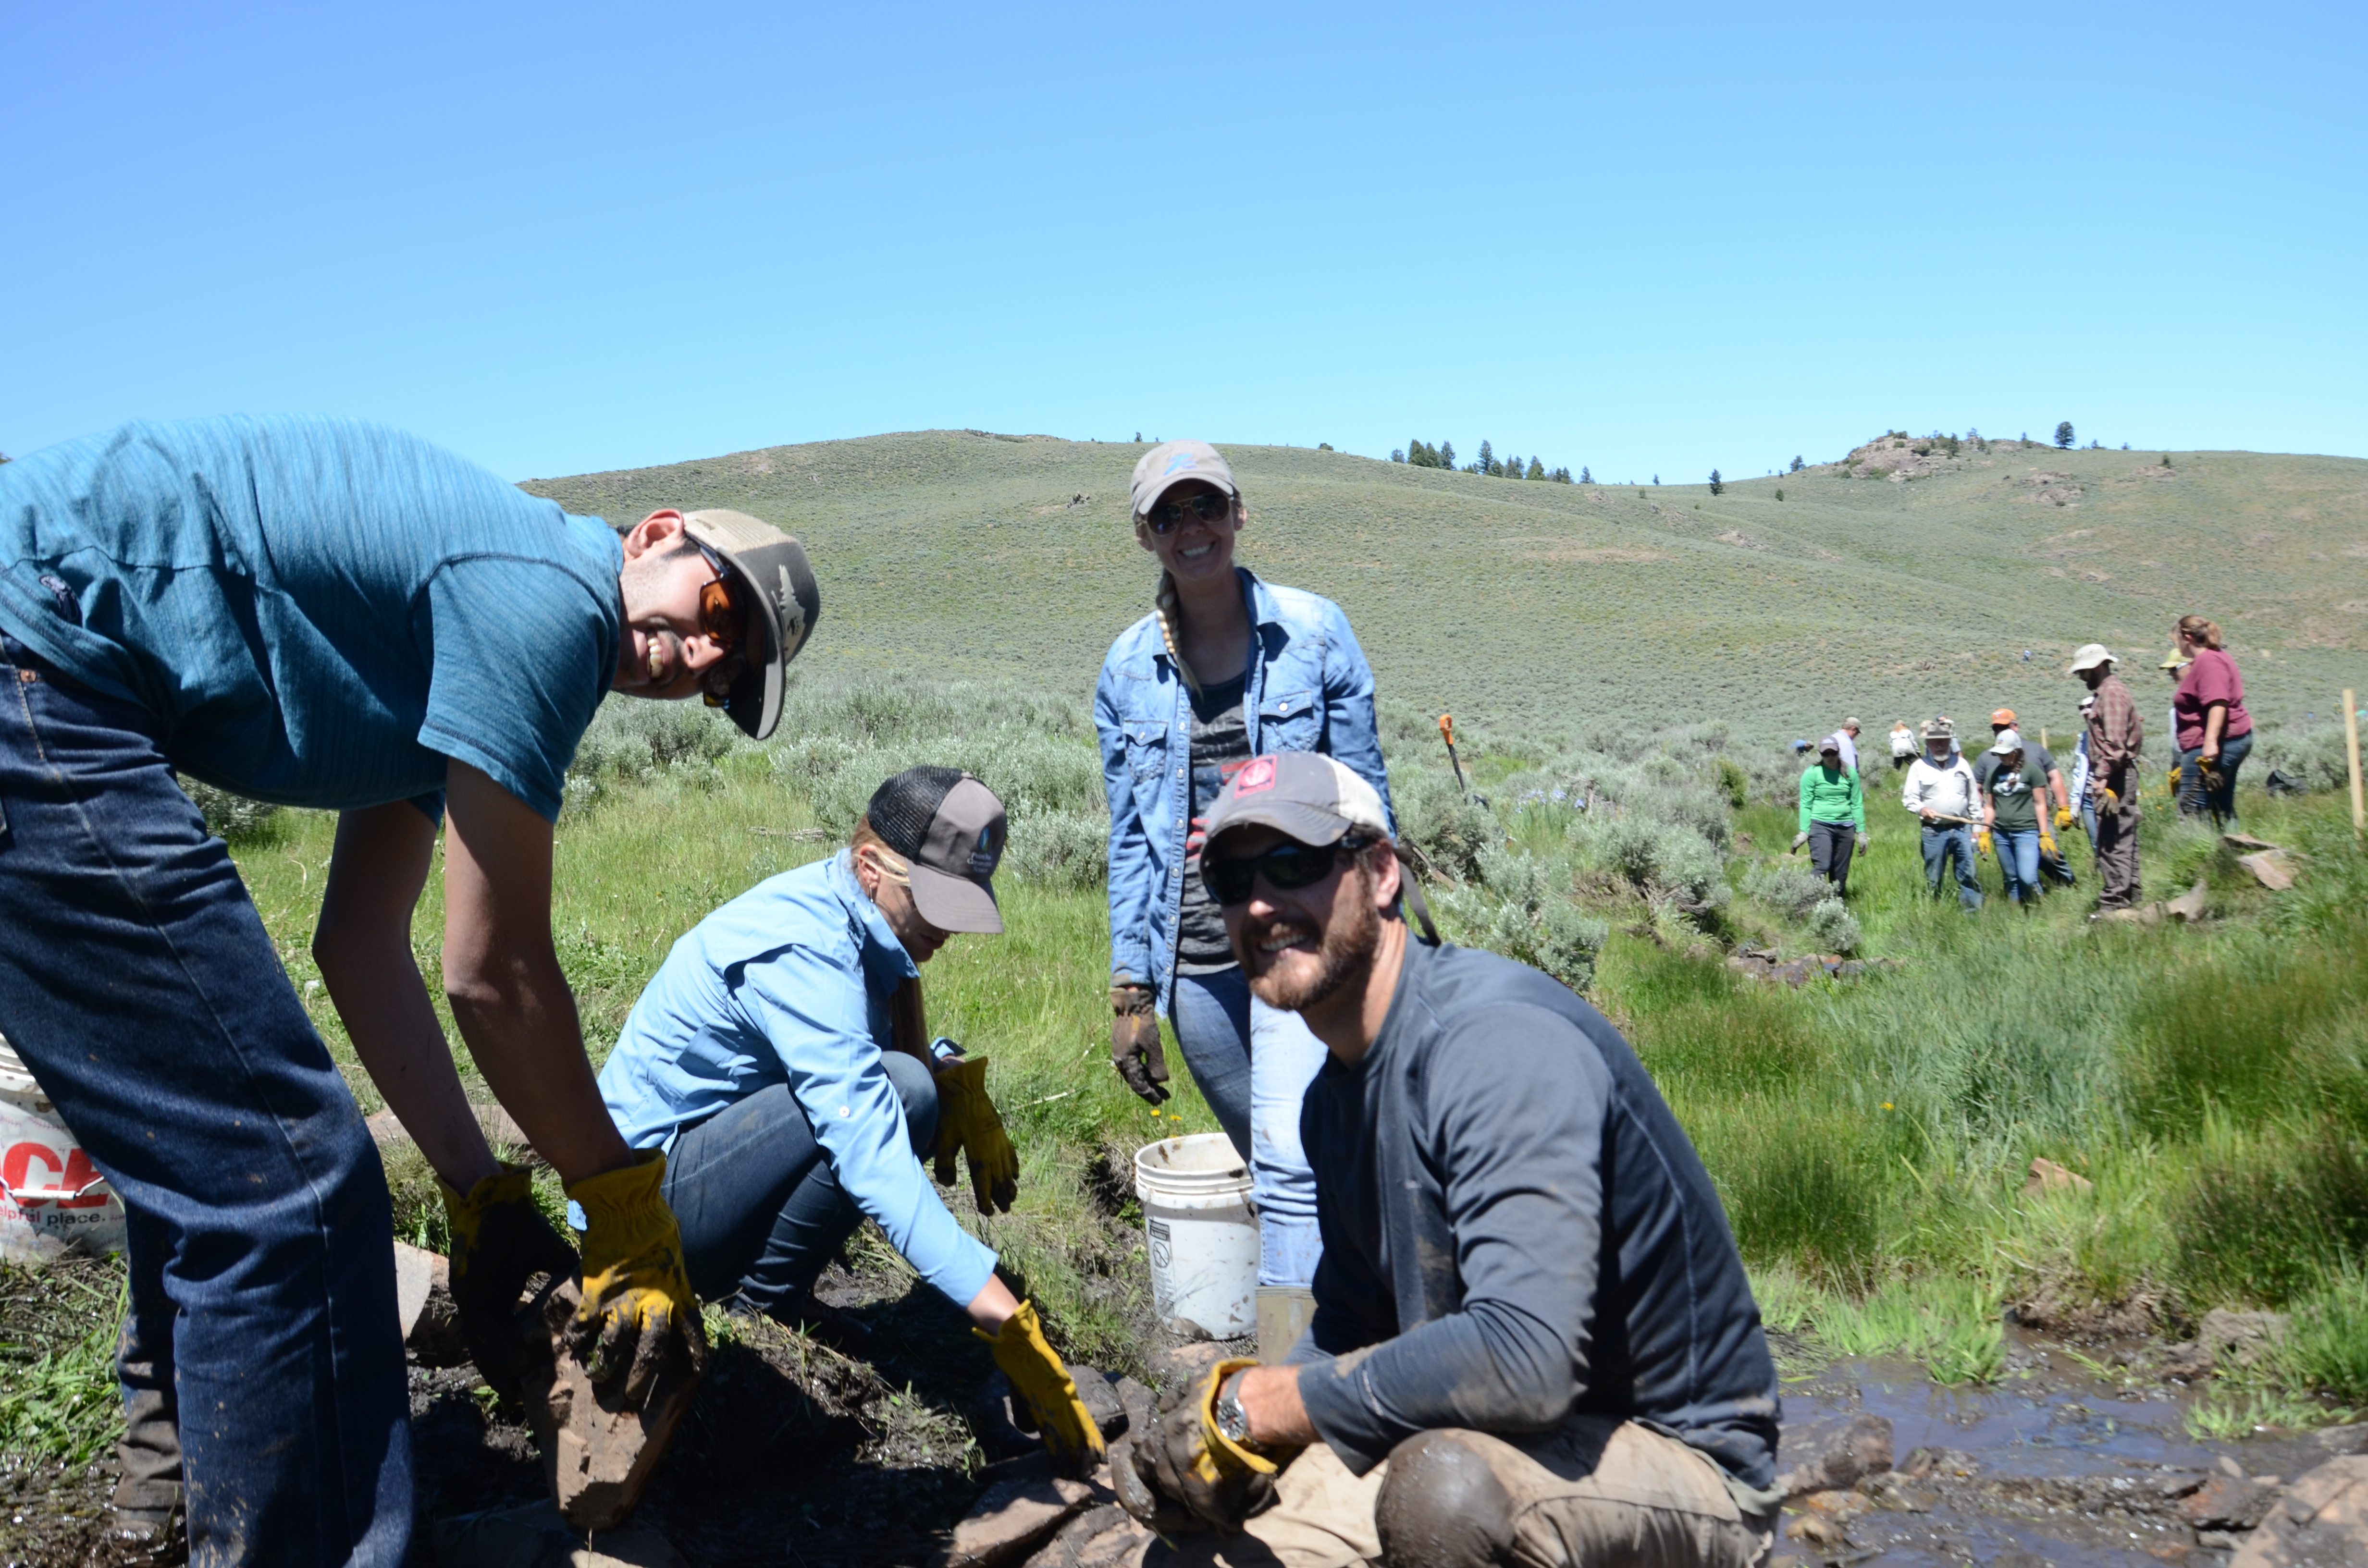 Getting dirty is fun in Gunnison! Learning how to build rock structures in wet meadows means lots of mud and heavy lifting, but SGI workshop participants had plenty to smile about as they worked together to fix streams. Photo: Brianna Randall